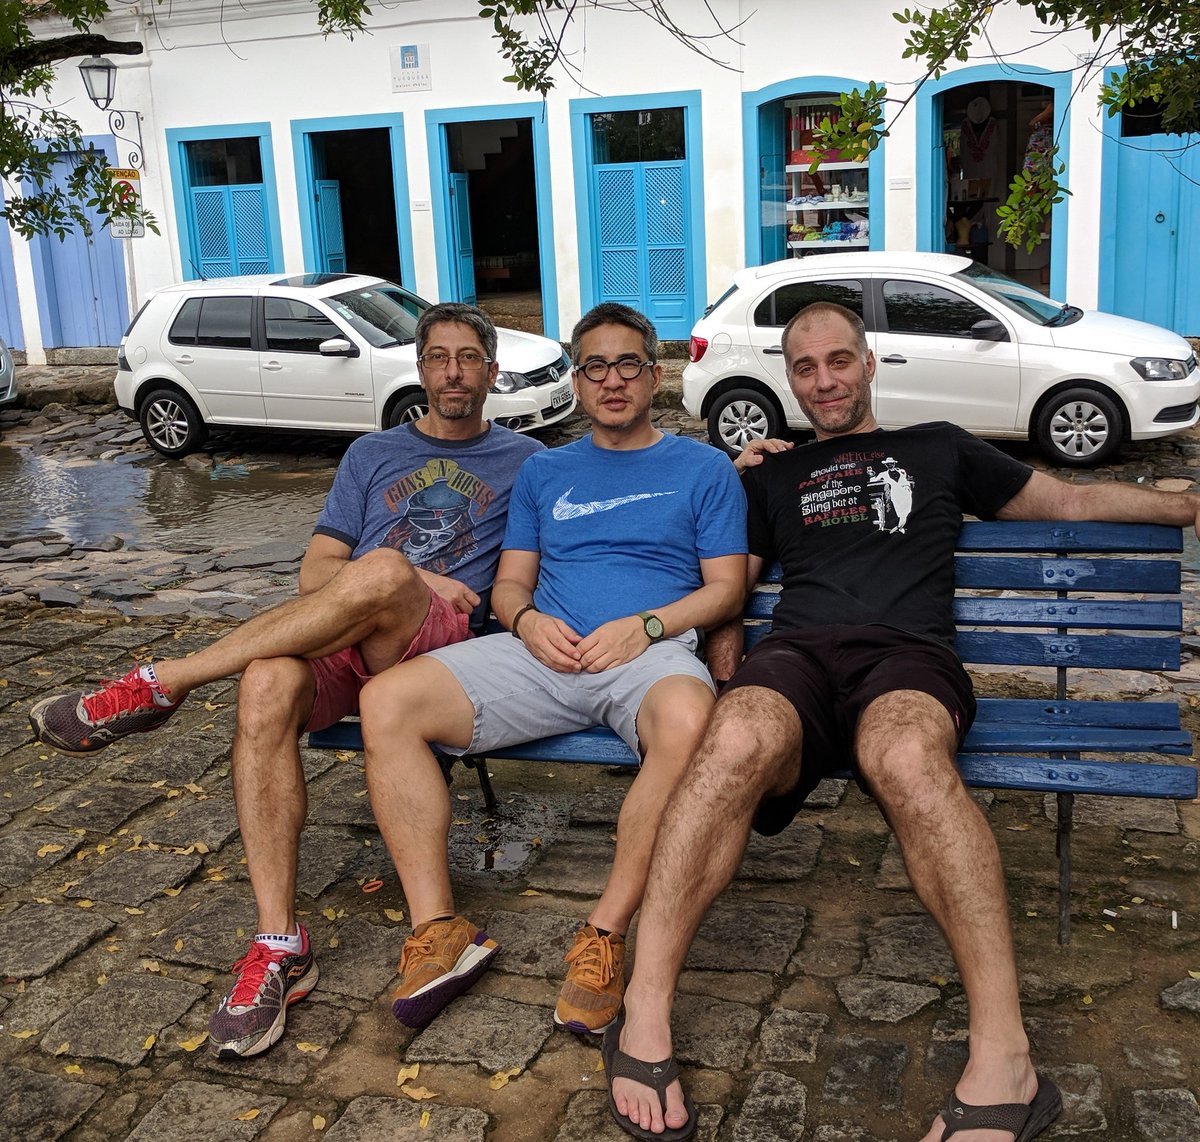 Met two of my best friends at McGill frosh week 33 yrs ago. Our kids grew up together. Vacations (photo of us in Brazil), cottage, hanging out, keeping secrets from the parents. This fall, our kids, Eli, Tino and Oliver, are all heading to McGill. Full circle.